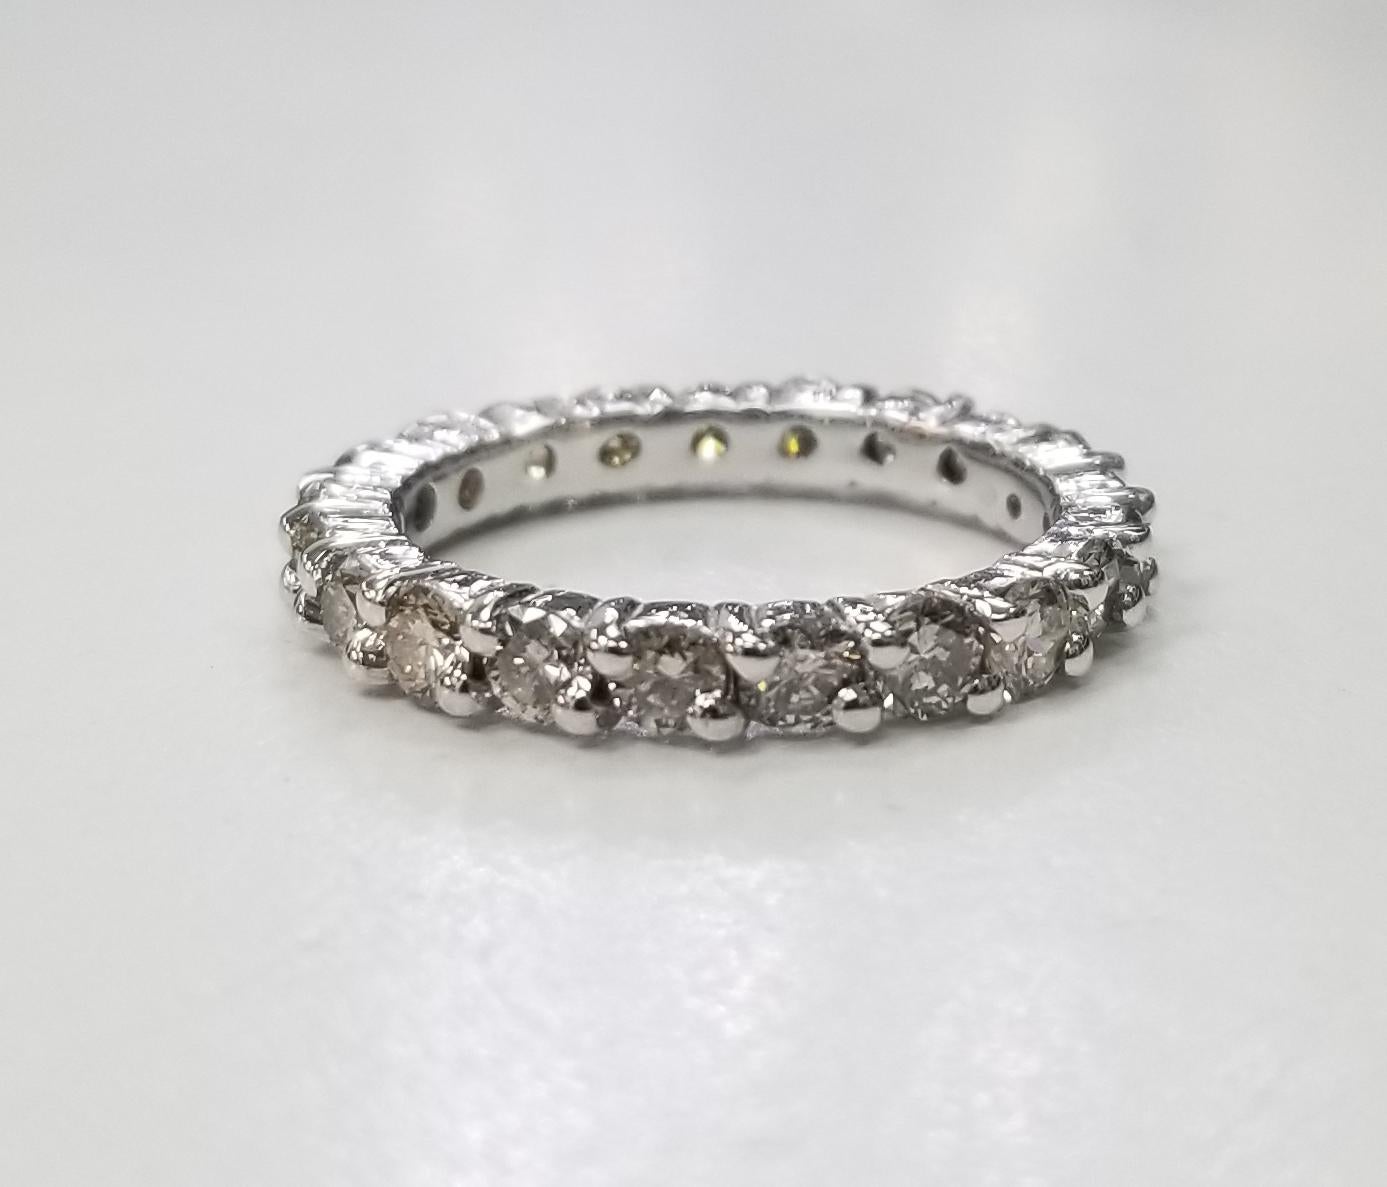 14k white gold 2.8mm wide Diamond eternity with shared prongs, ring with 2.12cts., containing 21 round full cut diamonds; color I, clarity VS and weight 2.12cts. ring is a size 6.25.